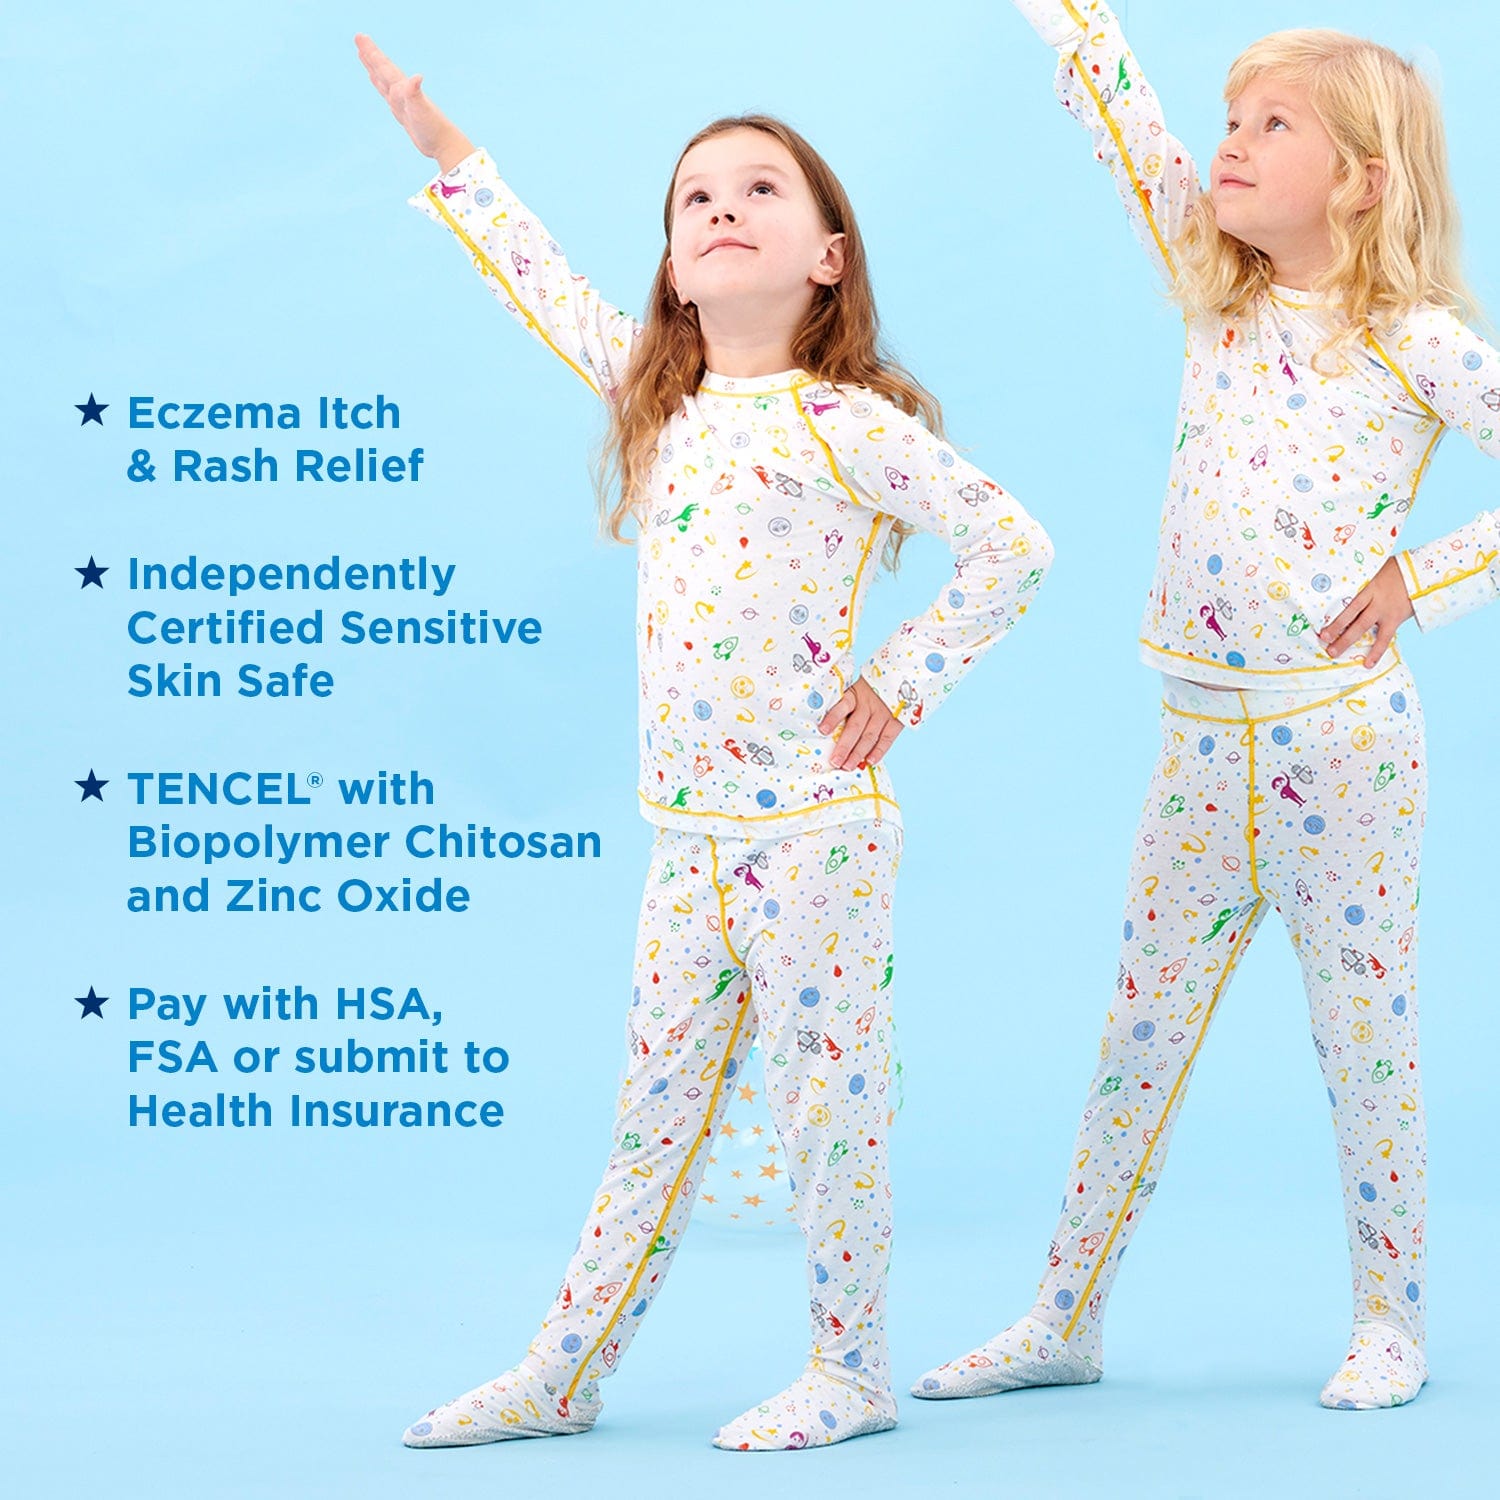 “Atopic Dermatitis Sleepwear Toddler and kids sizes and Clothing Stops Scratching from Eczema at Night”